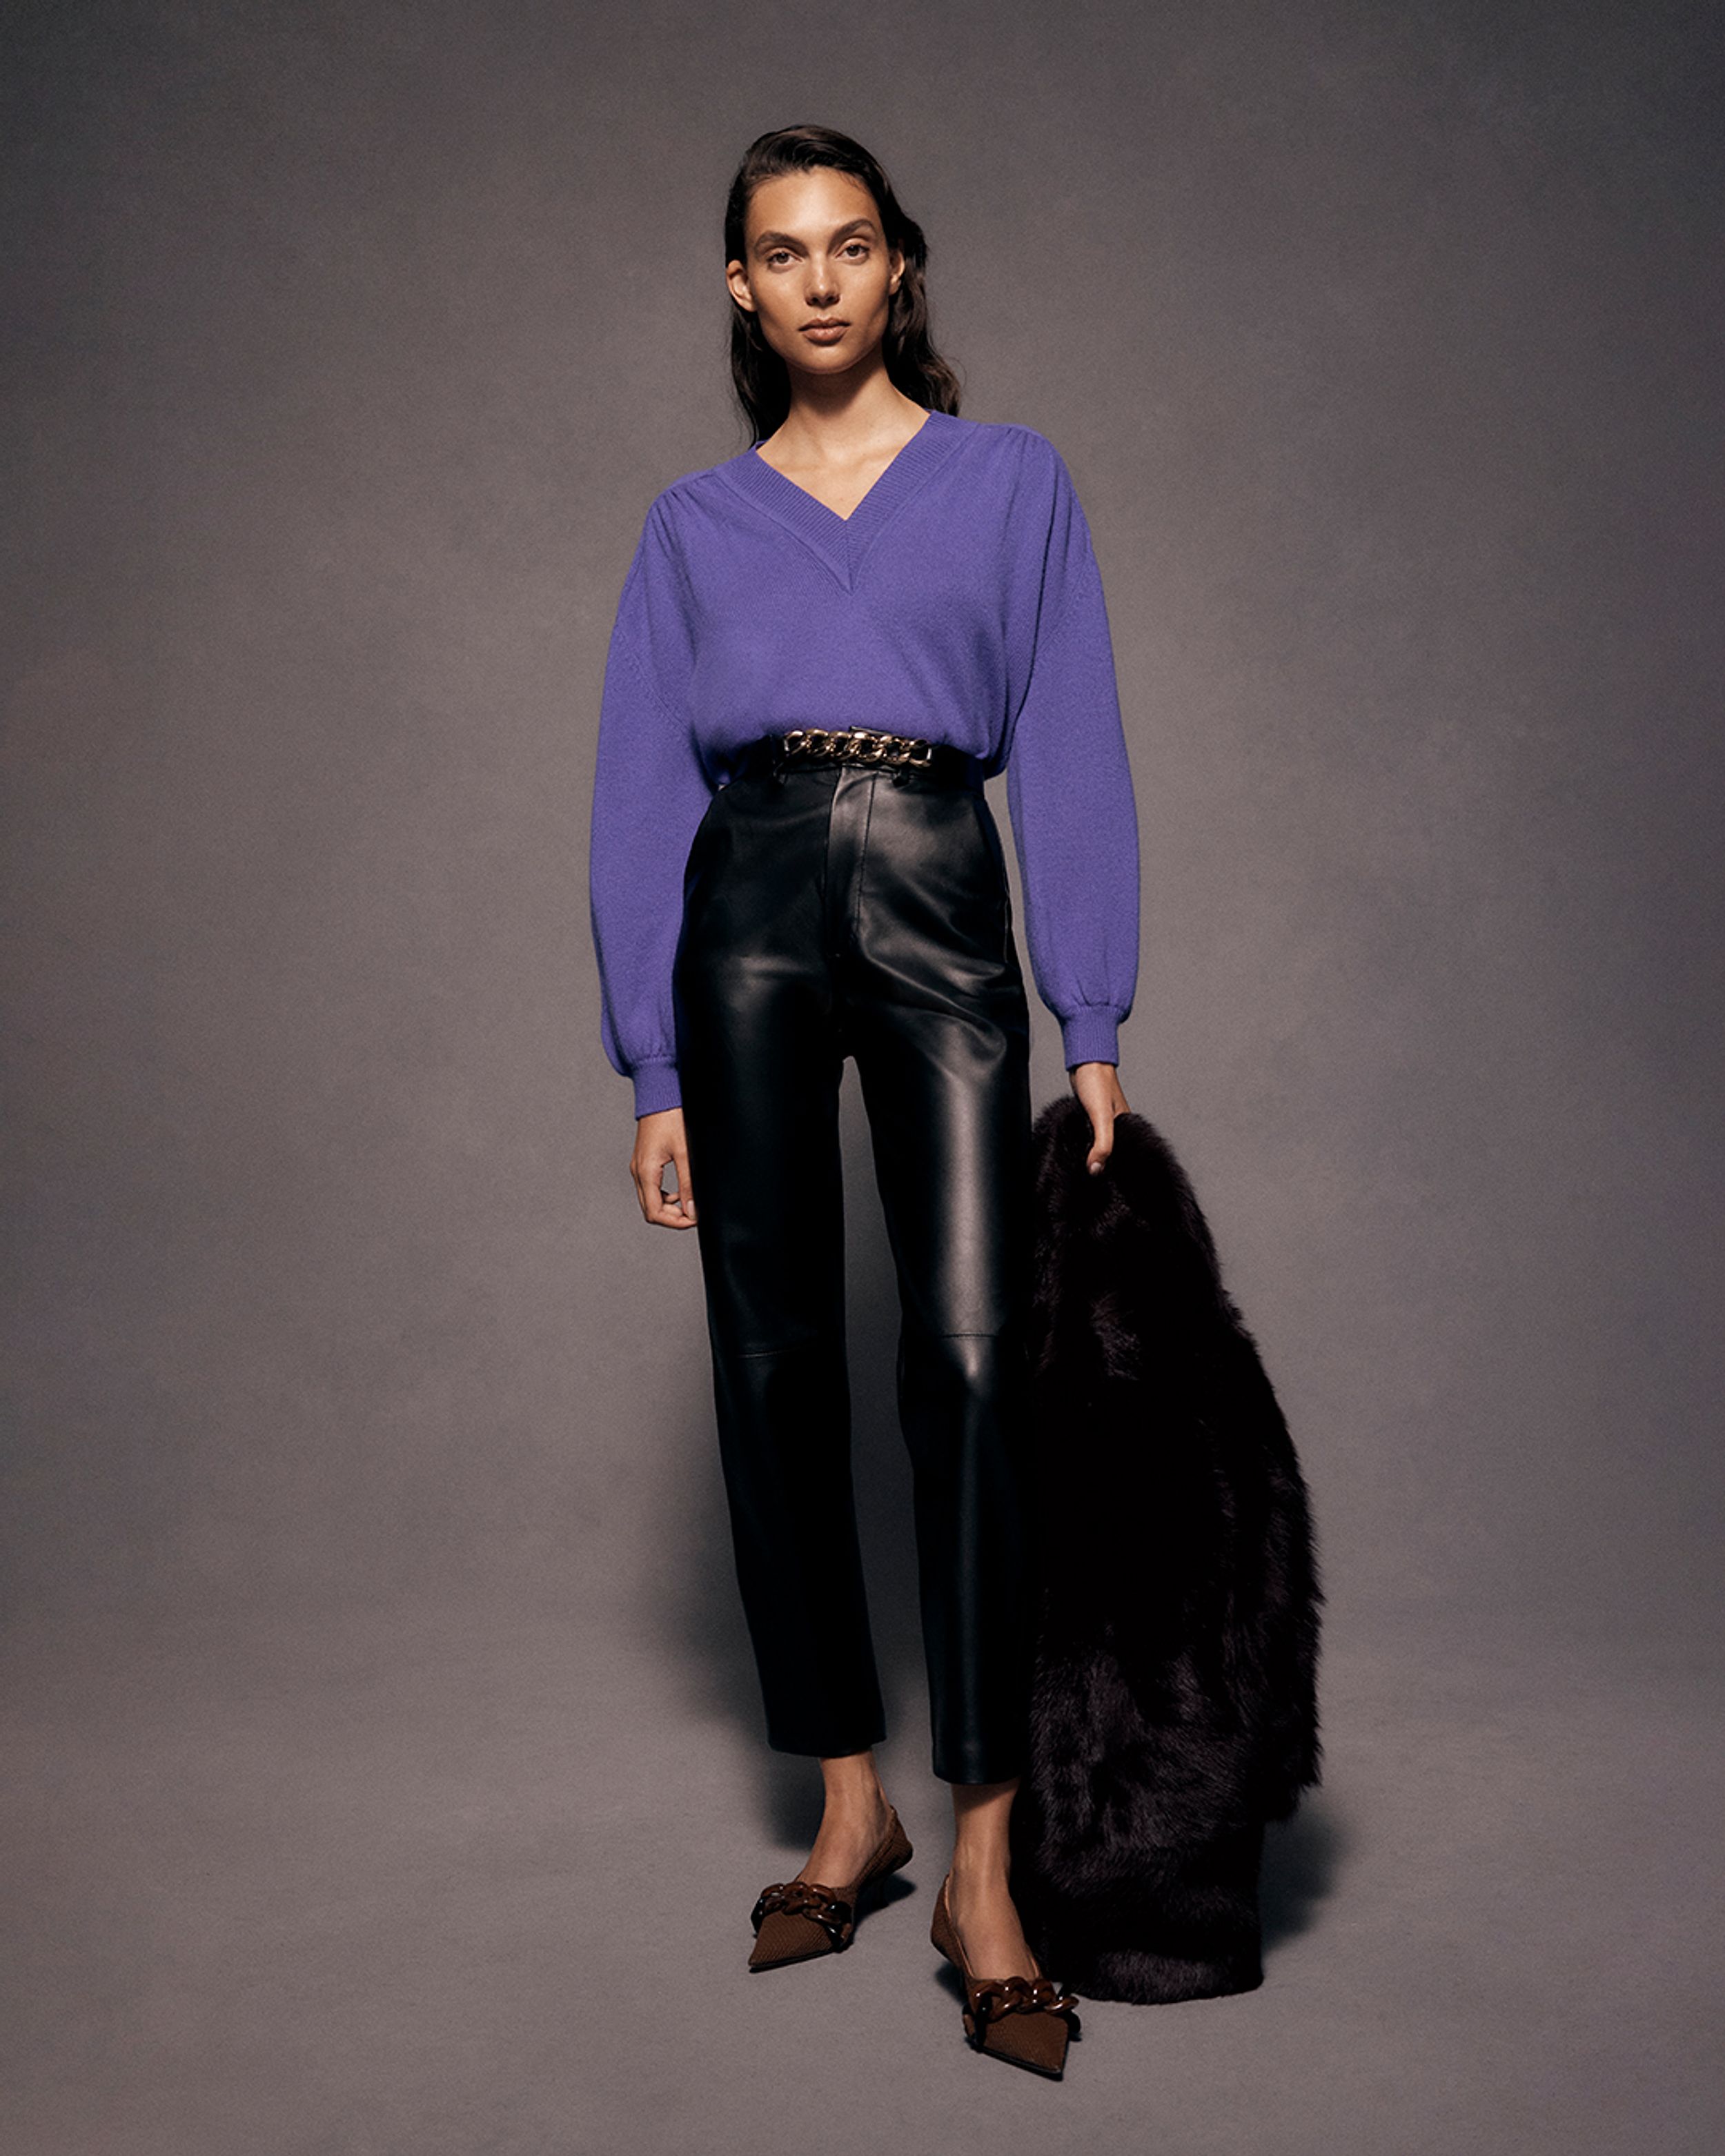 Brunette model standing in a purple v-neck sweater and leather trousers, holding a black jacket